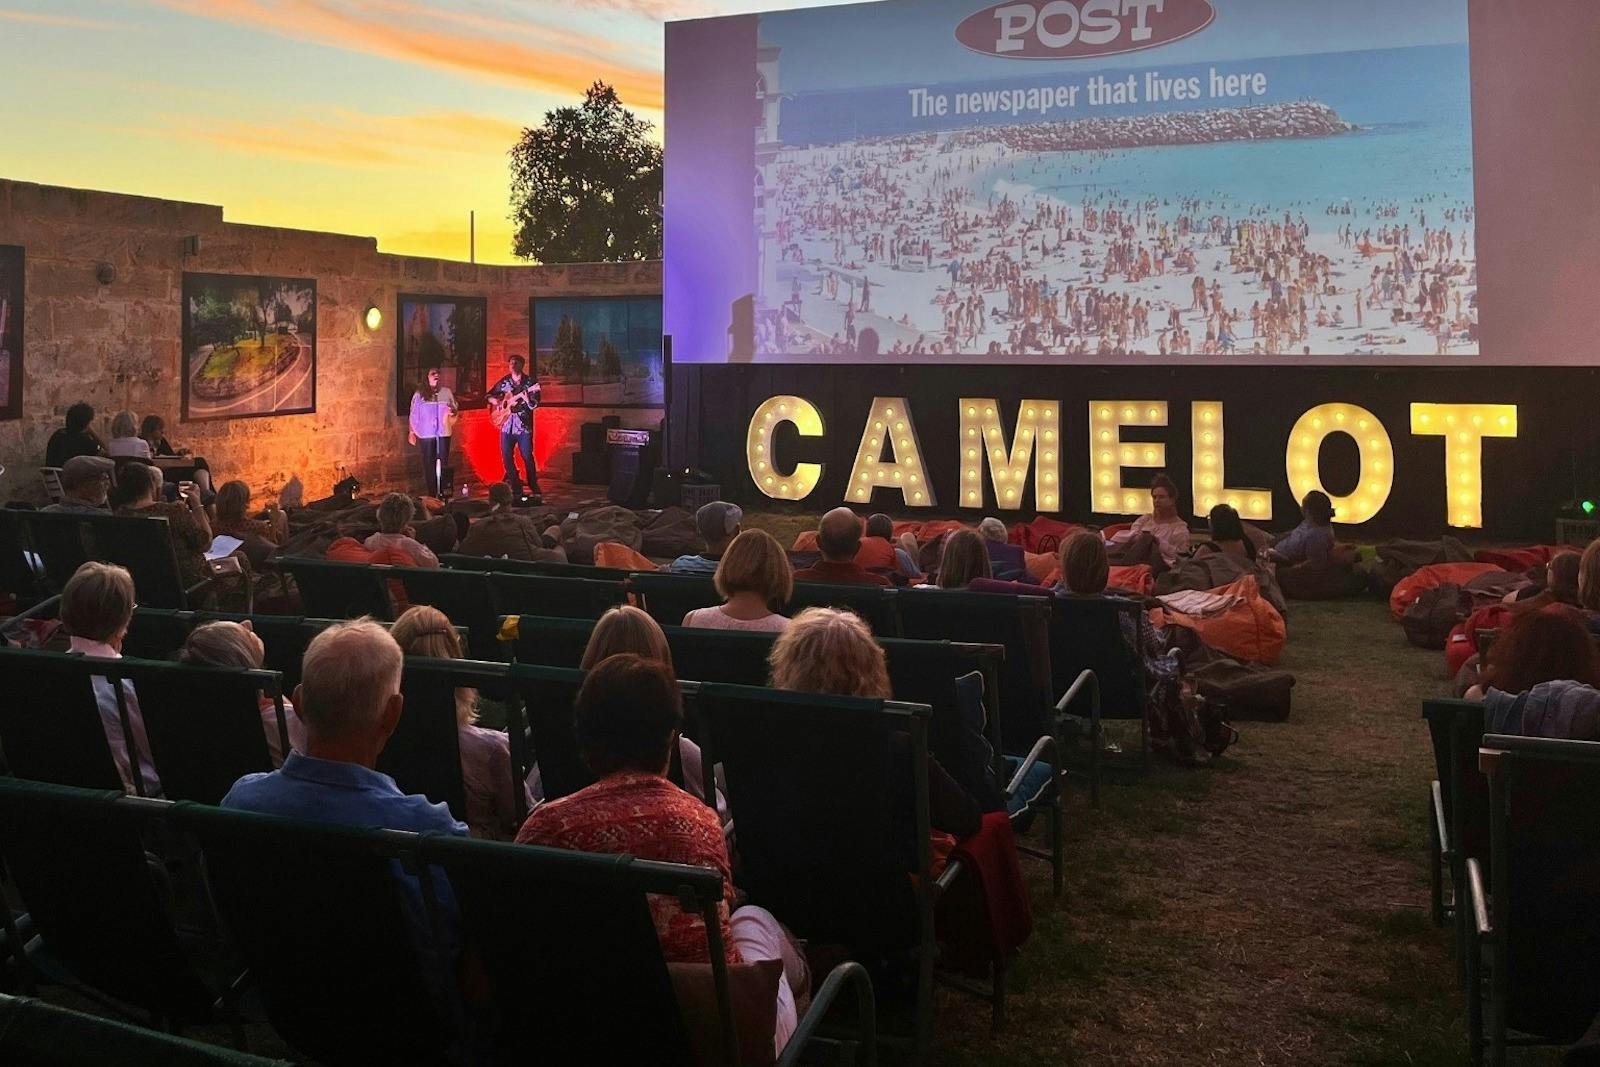 Camelout Outdoor Cinema